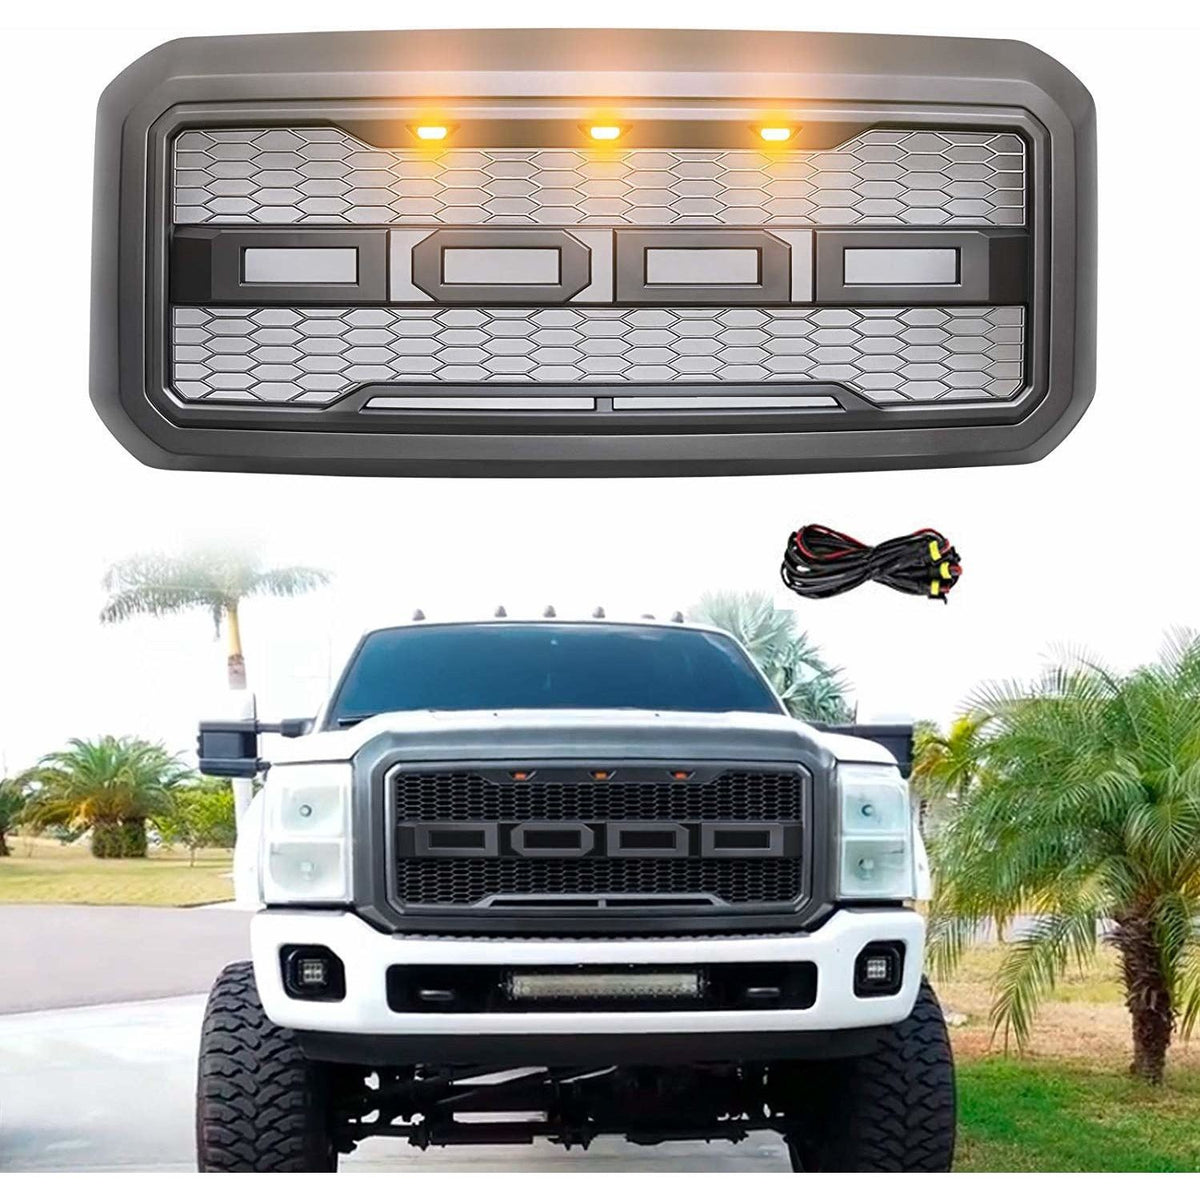 2011-2016 Ford F250 | Raptor Style Grille - Truck Accessories Guy